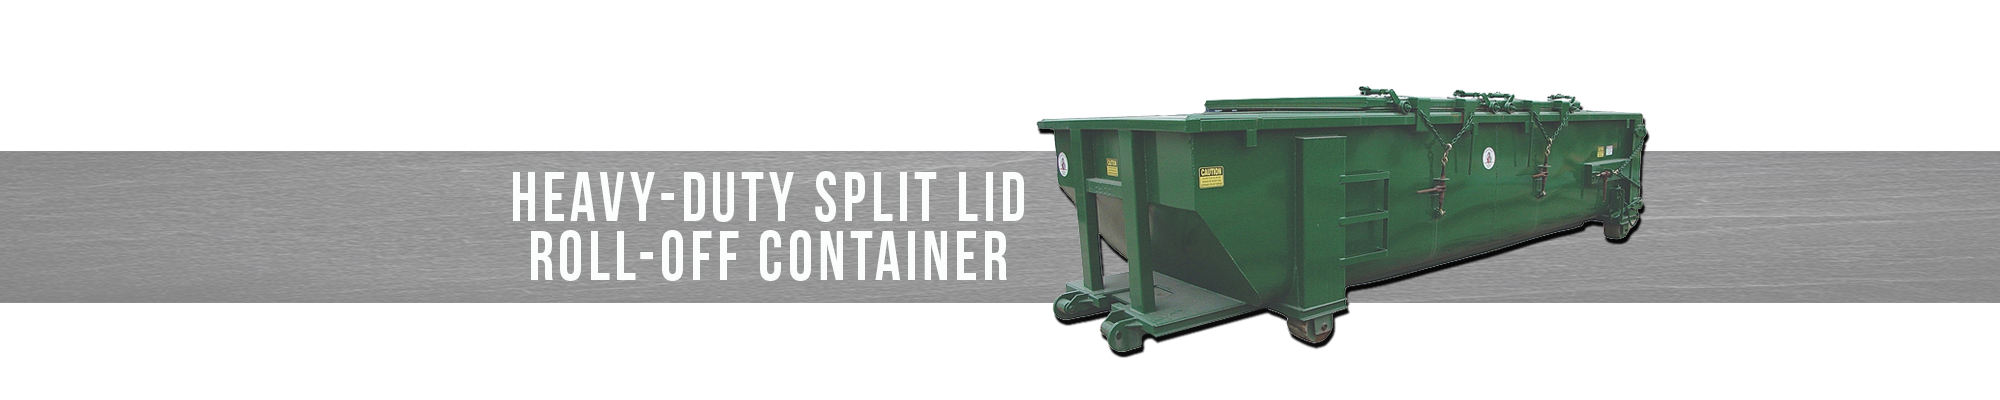 Heavy-Duty Split Lid Roll-Off Container